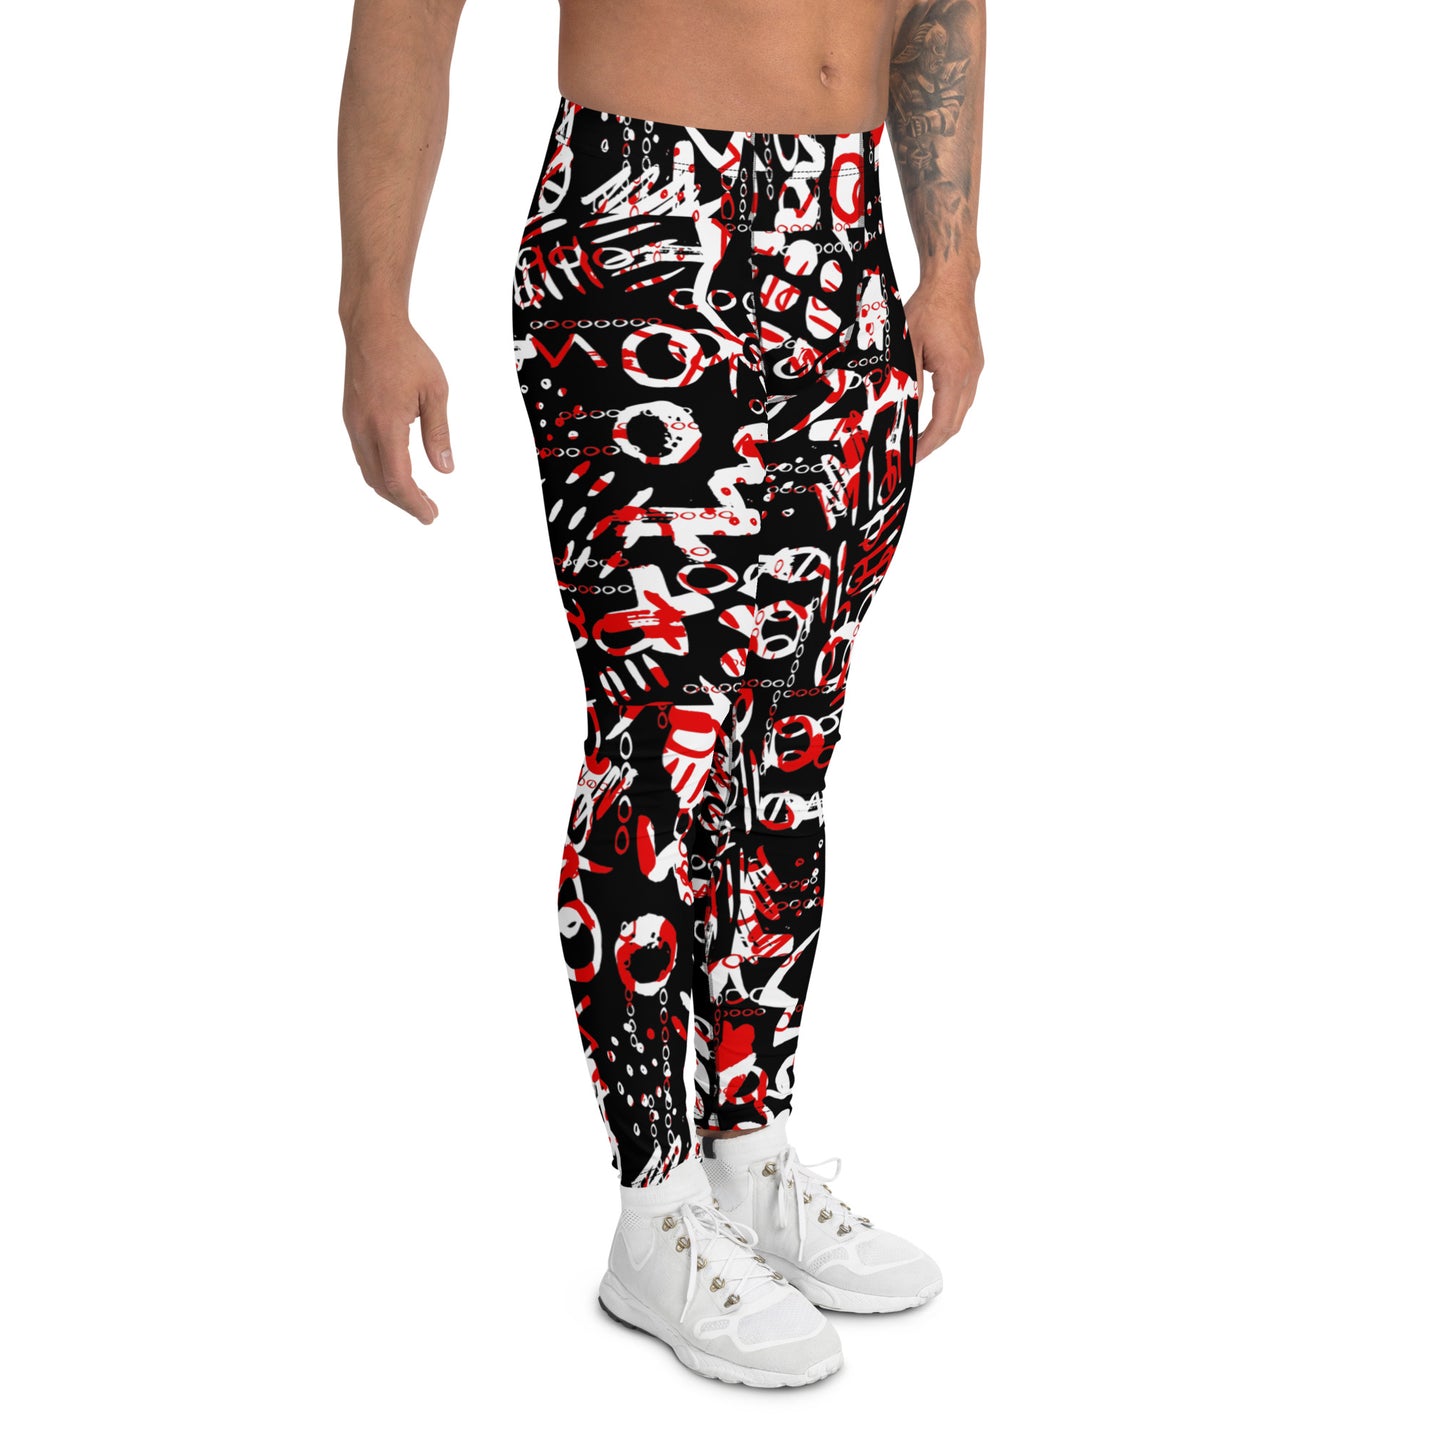 Men's all-over print leggings with white background, left-side view.